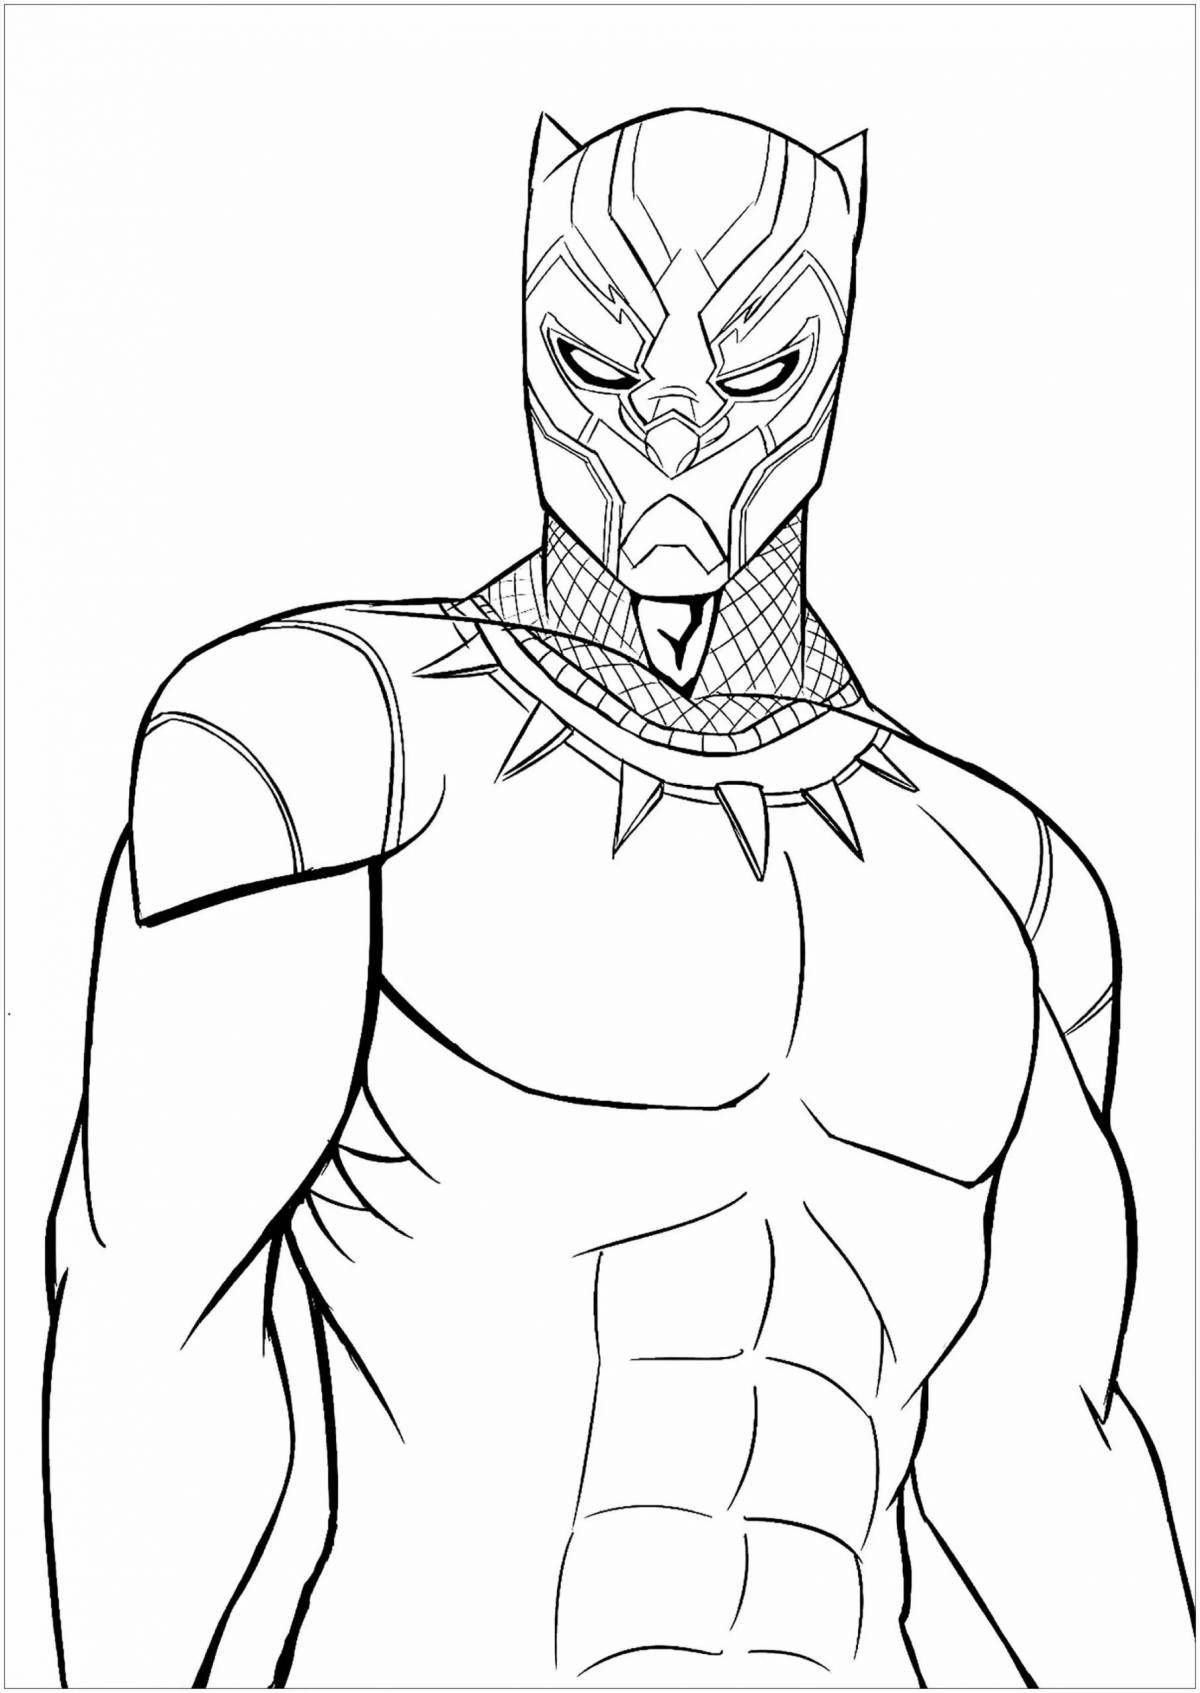 Great marvel black panther coloring book